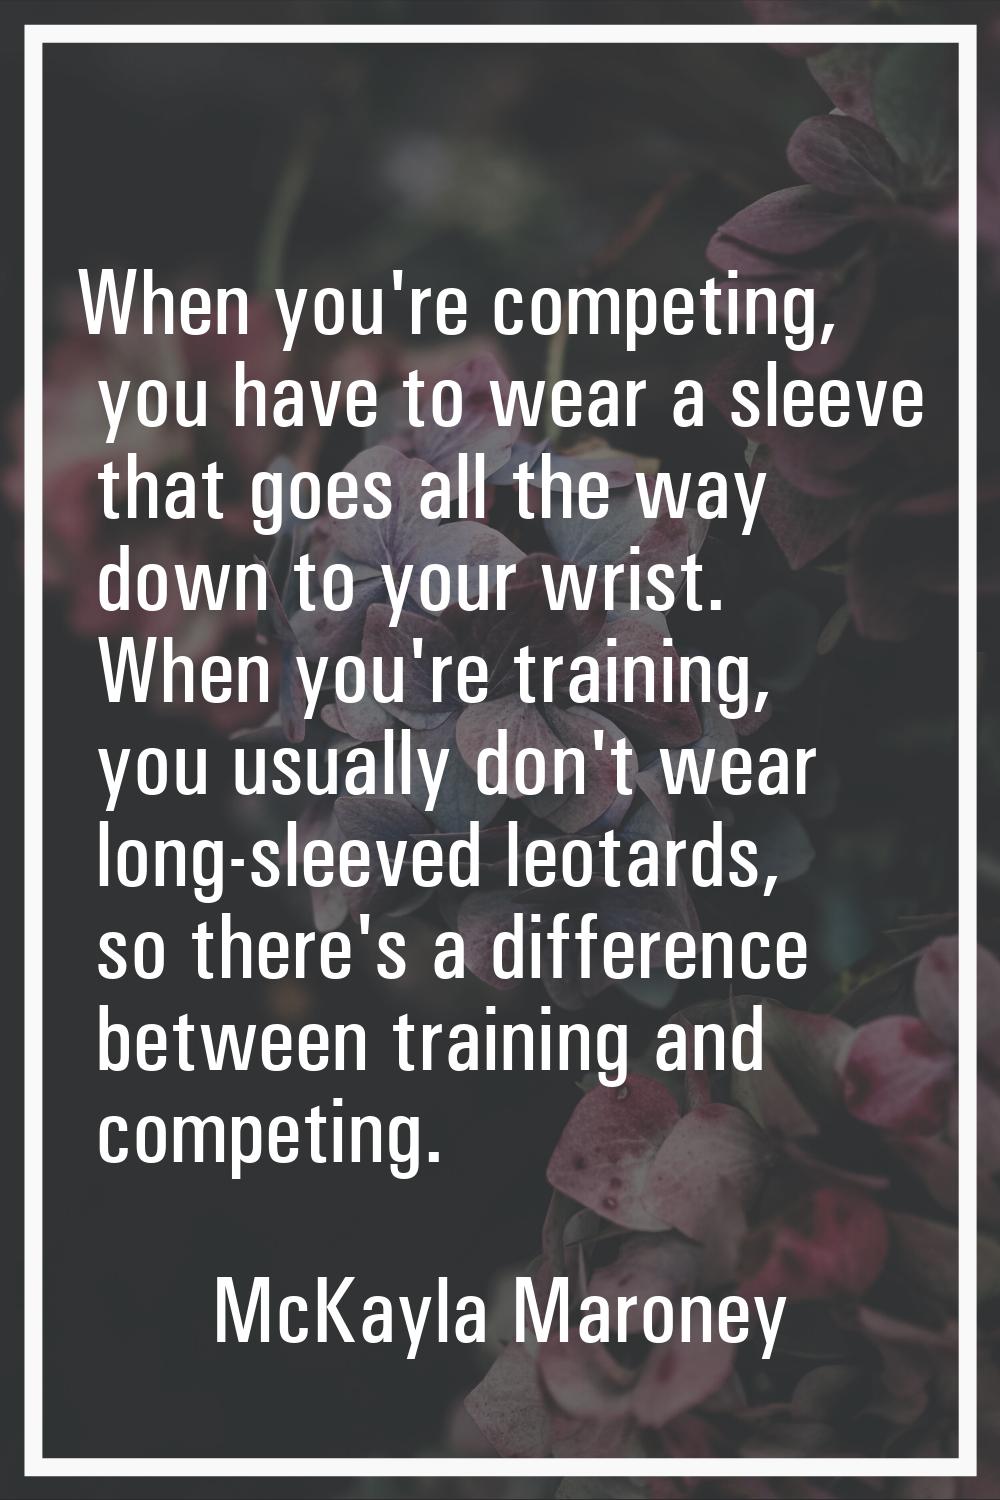 When you're competing, you have to wear a sleeve that goes all the way down to your wrist. When you